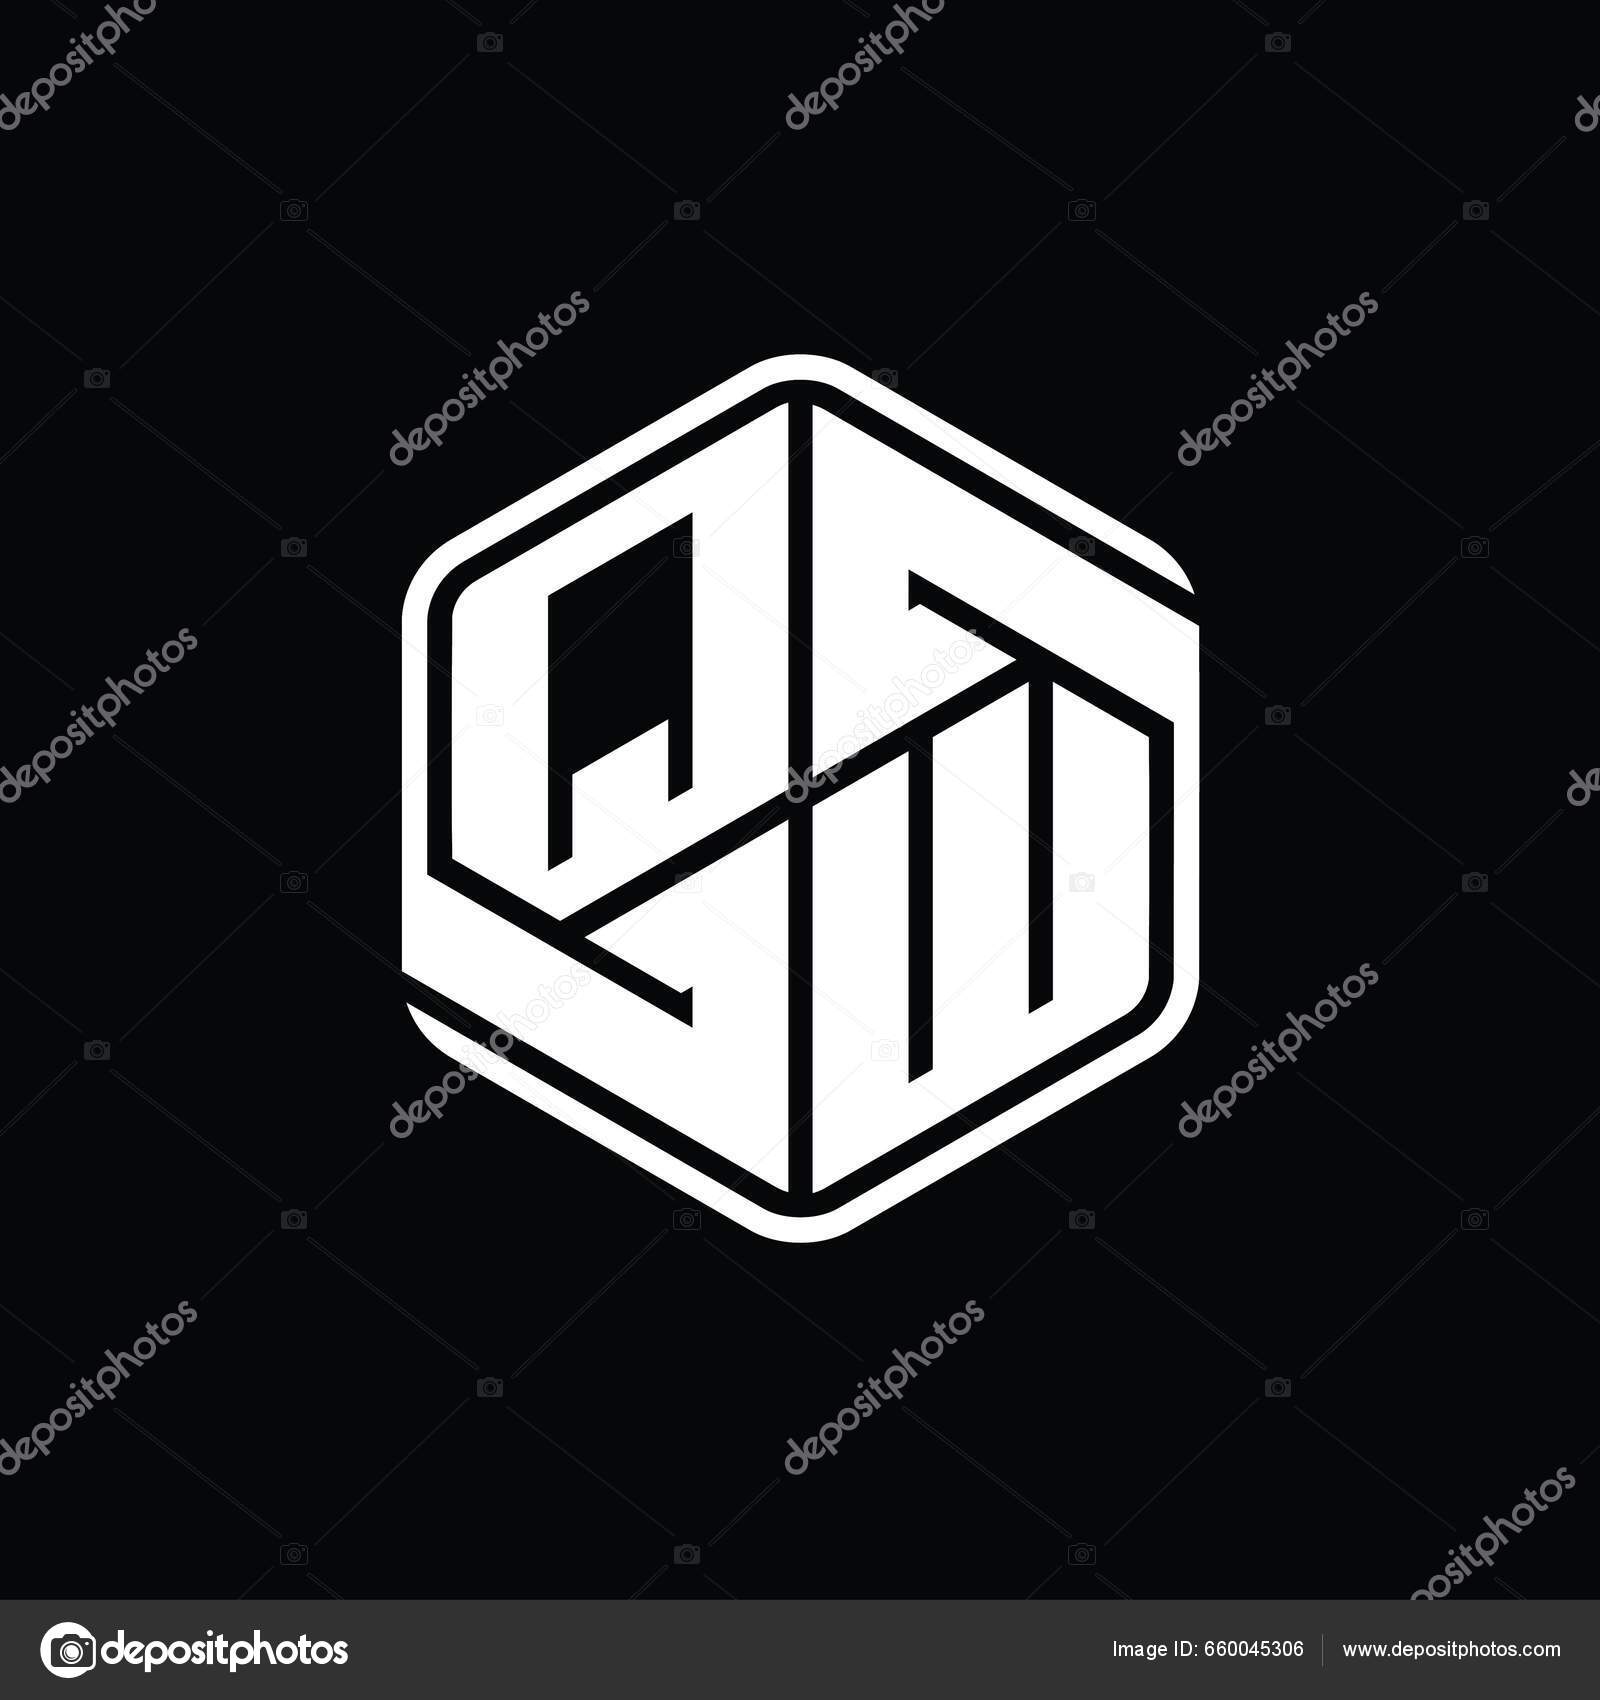 Pm monogram logo with abstract hexagon style Vector Image